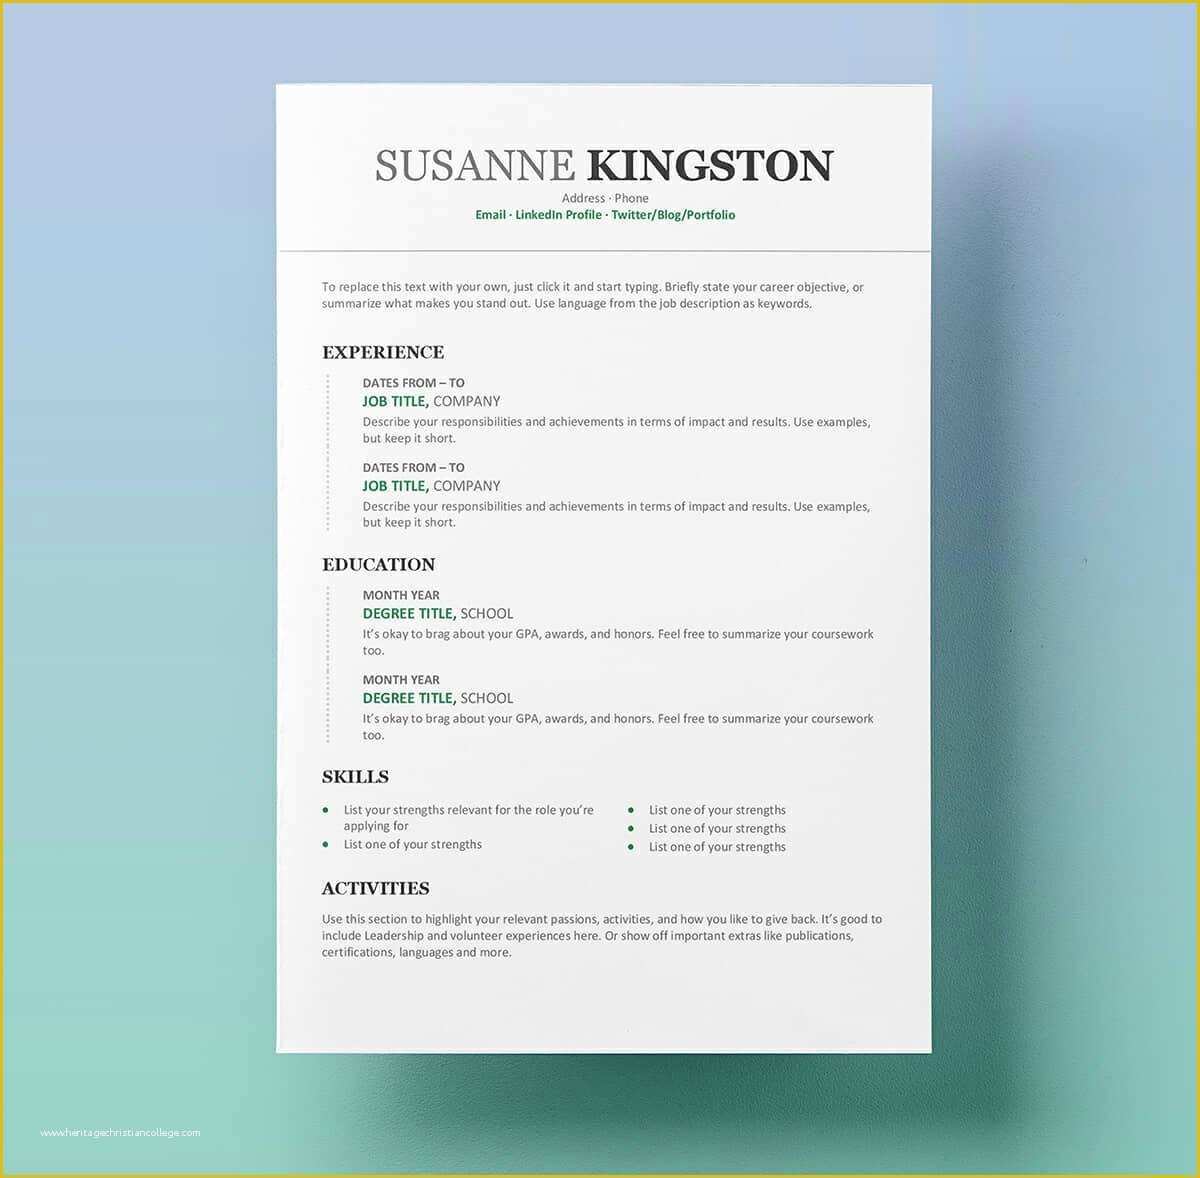 Free Microsoft Resume Templates for Word Of Resume Templates for Word Free 15 Examples for Download